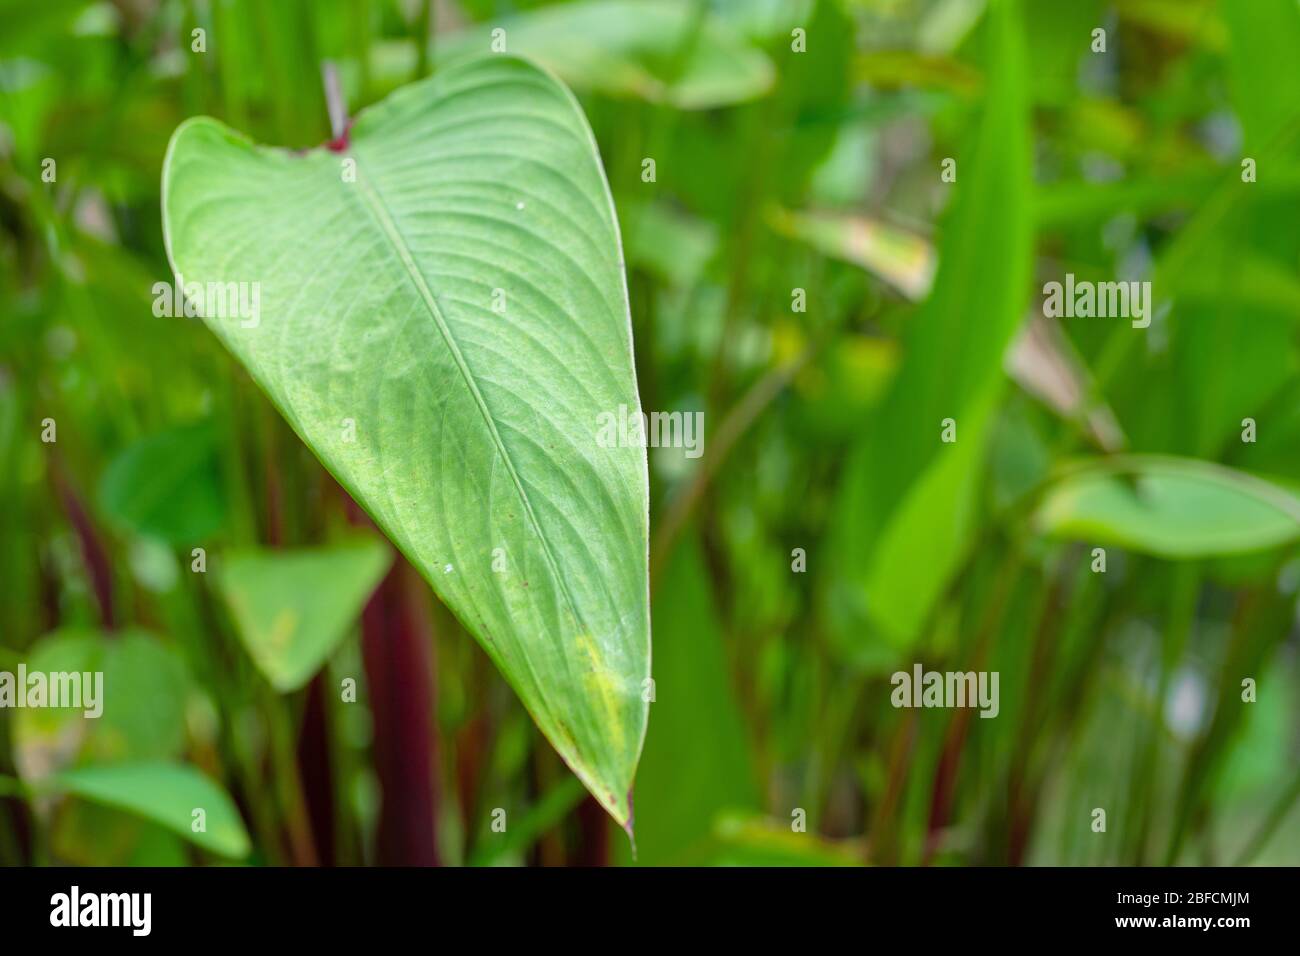 Saturated green leaf of a tropical plant. Stock Photo